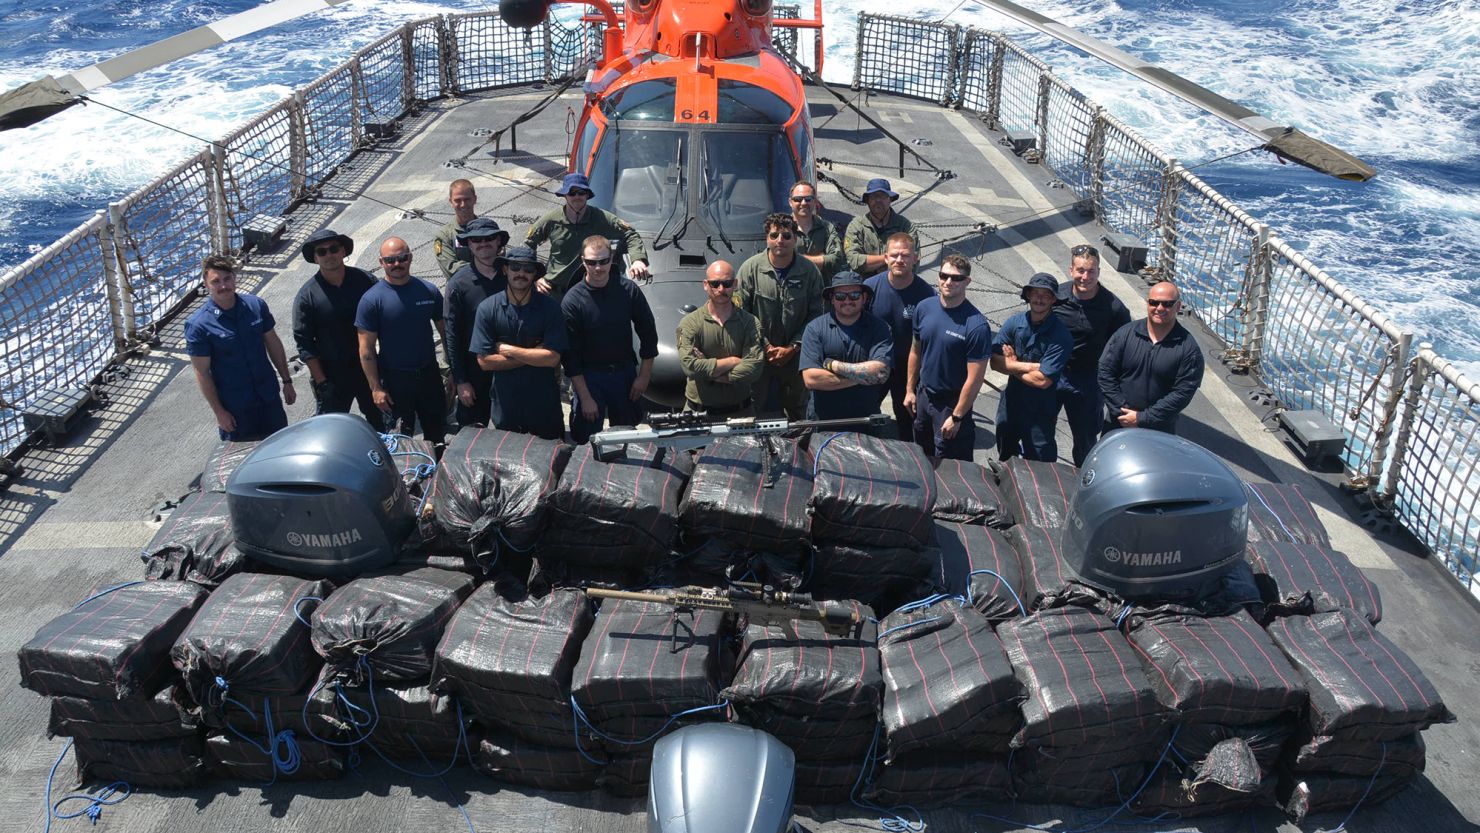 Crewmembers of the Coast Guard Cutter Alert (WMEC 630) stand behind cocaine bales seized from a drug smuggling vessel in Eastern Pacific waters during the cutterâ€™s last patrol out of its current homeport of Astoria,
Oregon, Feb. 7, 2024. The 4,950 kg of cocaine seized is estimated to be valued at more than $143 million. (U.S. Coast Guard courtesy photo)